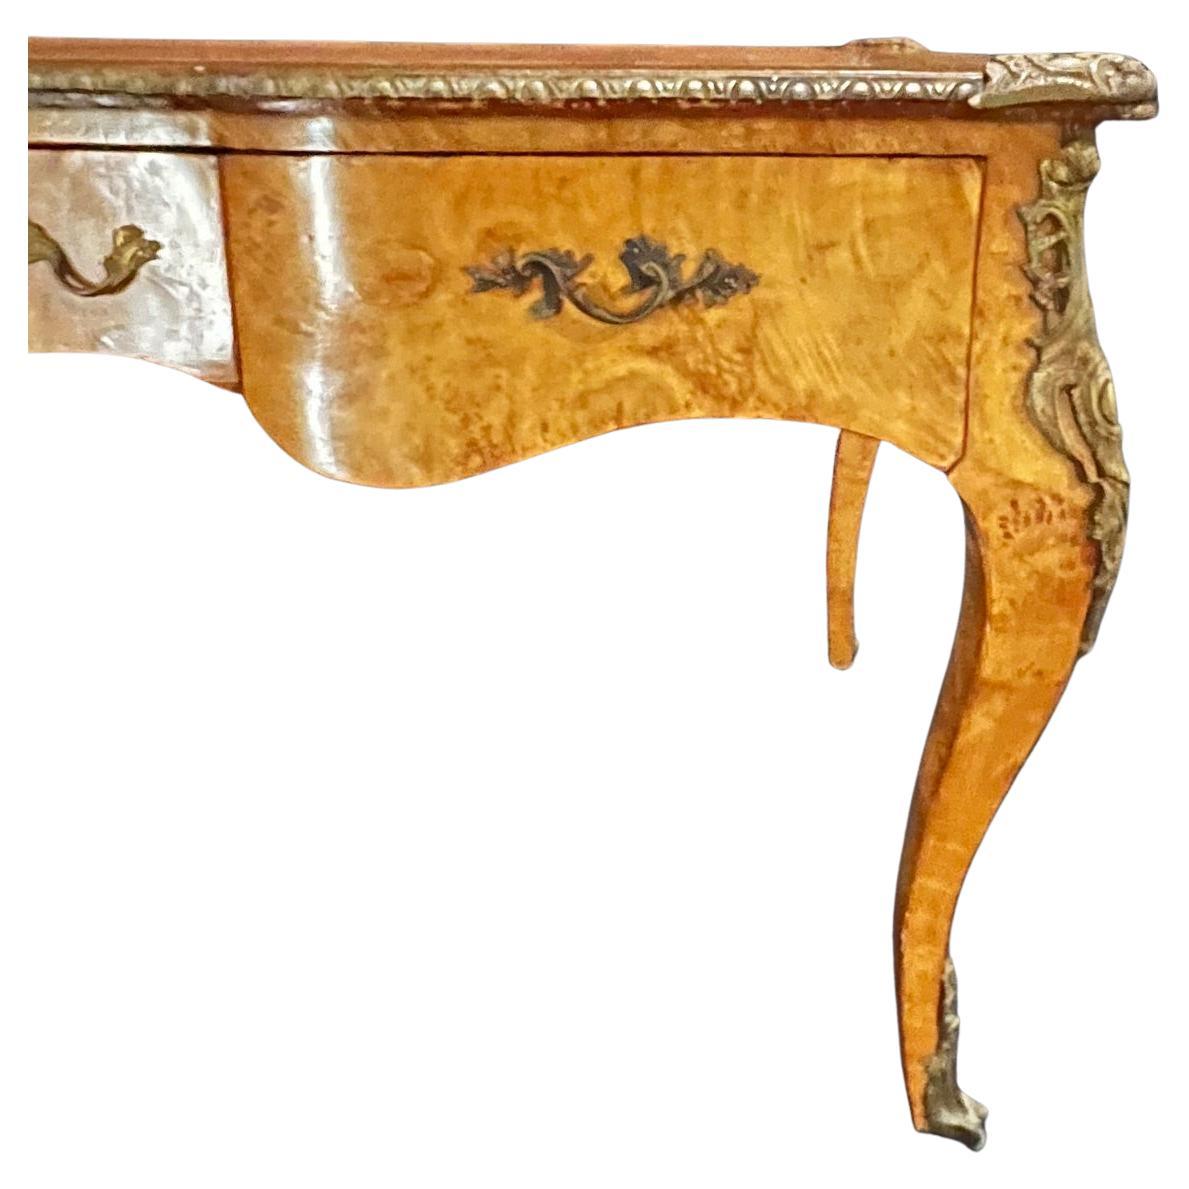 An outstanding French Louis XV style writing desk or bureau plat desk with bronze trim and ornate ormolu mounts and embossed leather top. The desk is finished on all sides and could be used floating in a room. 24.5 h over knee
#4718